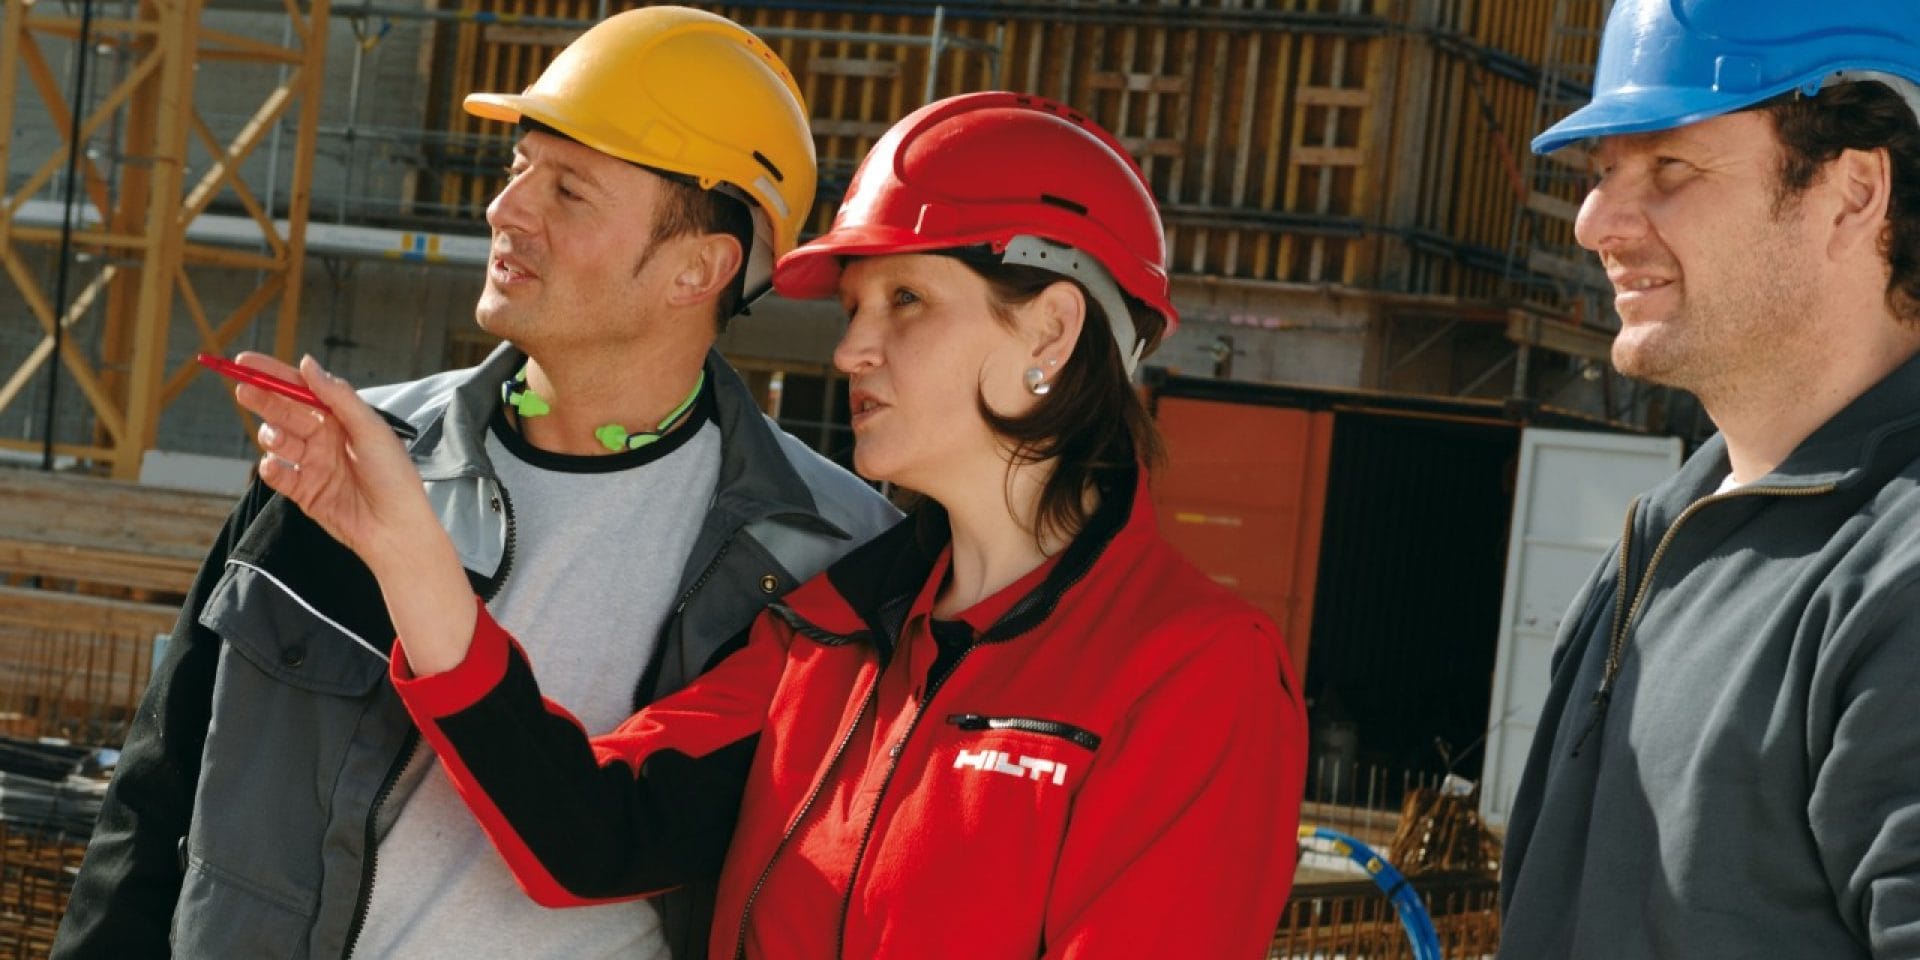 Hilti field engineer consulting onsite